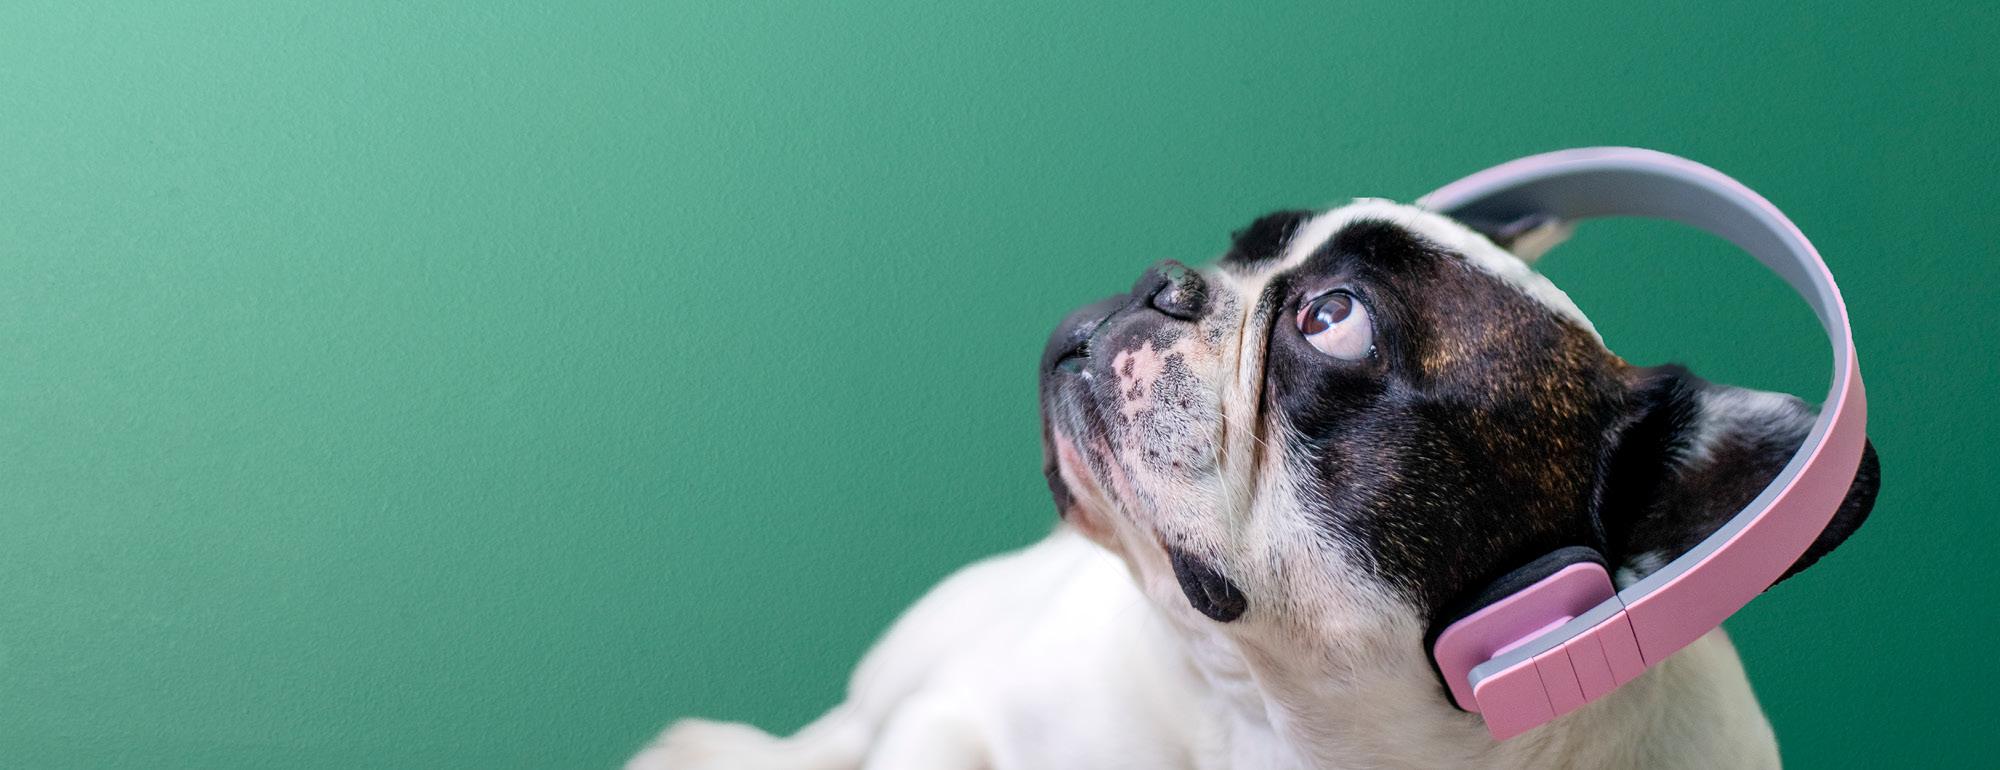 Photo of a bulldog wearing headphones and looking up with a mint green background